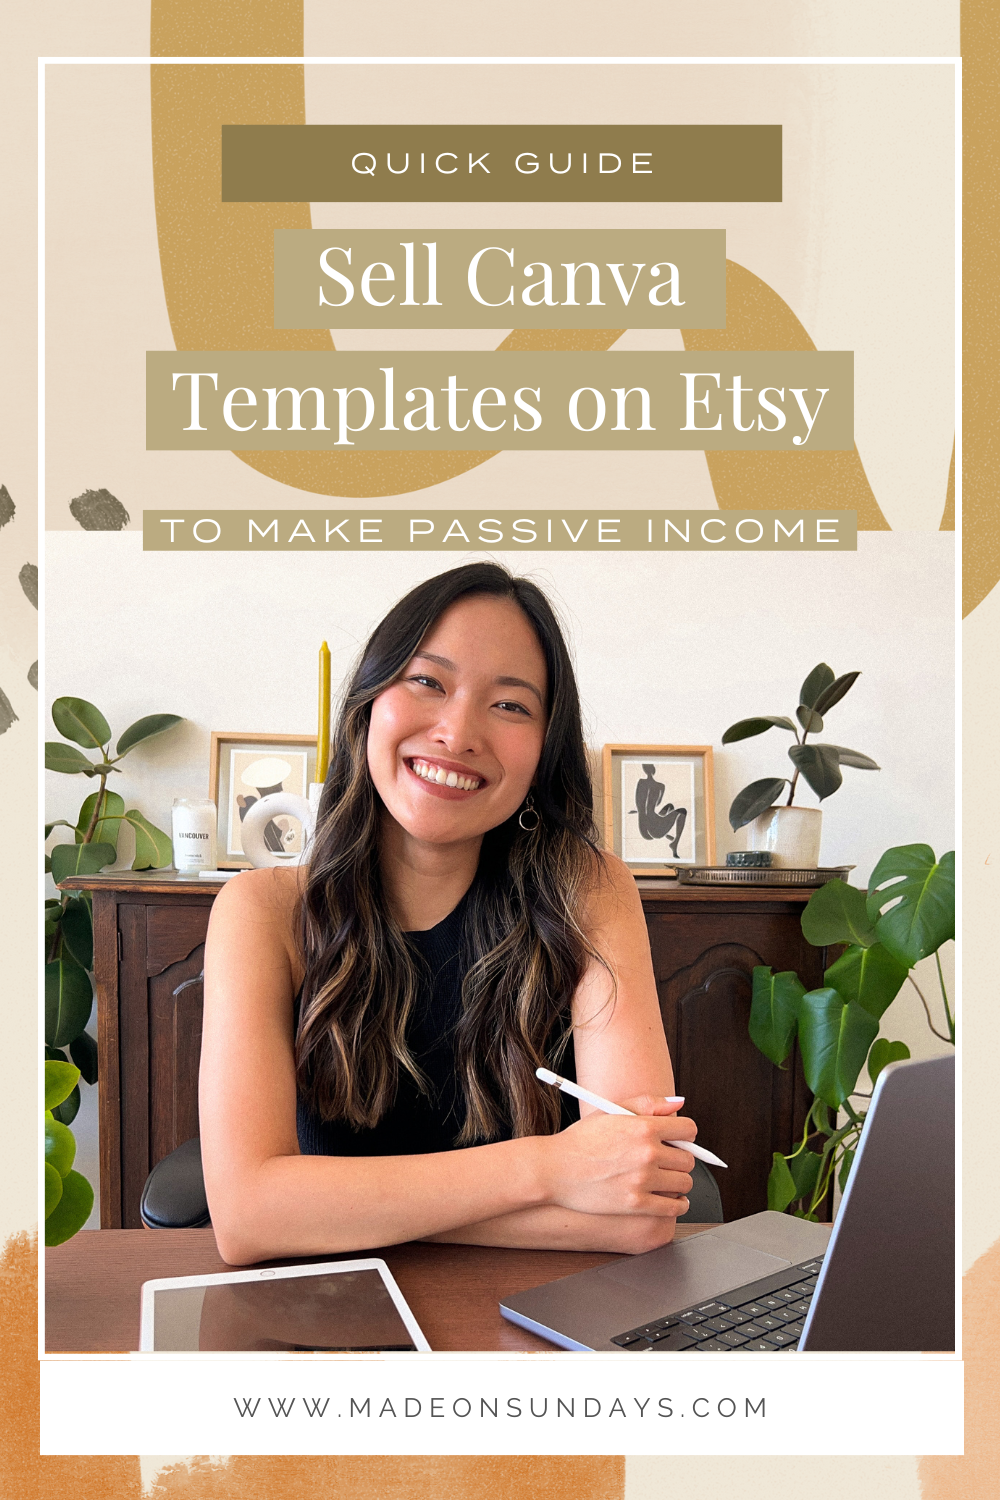 Sell Canva Templates